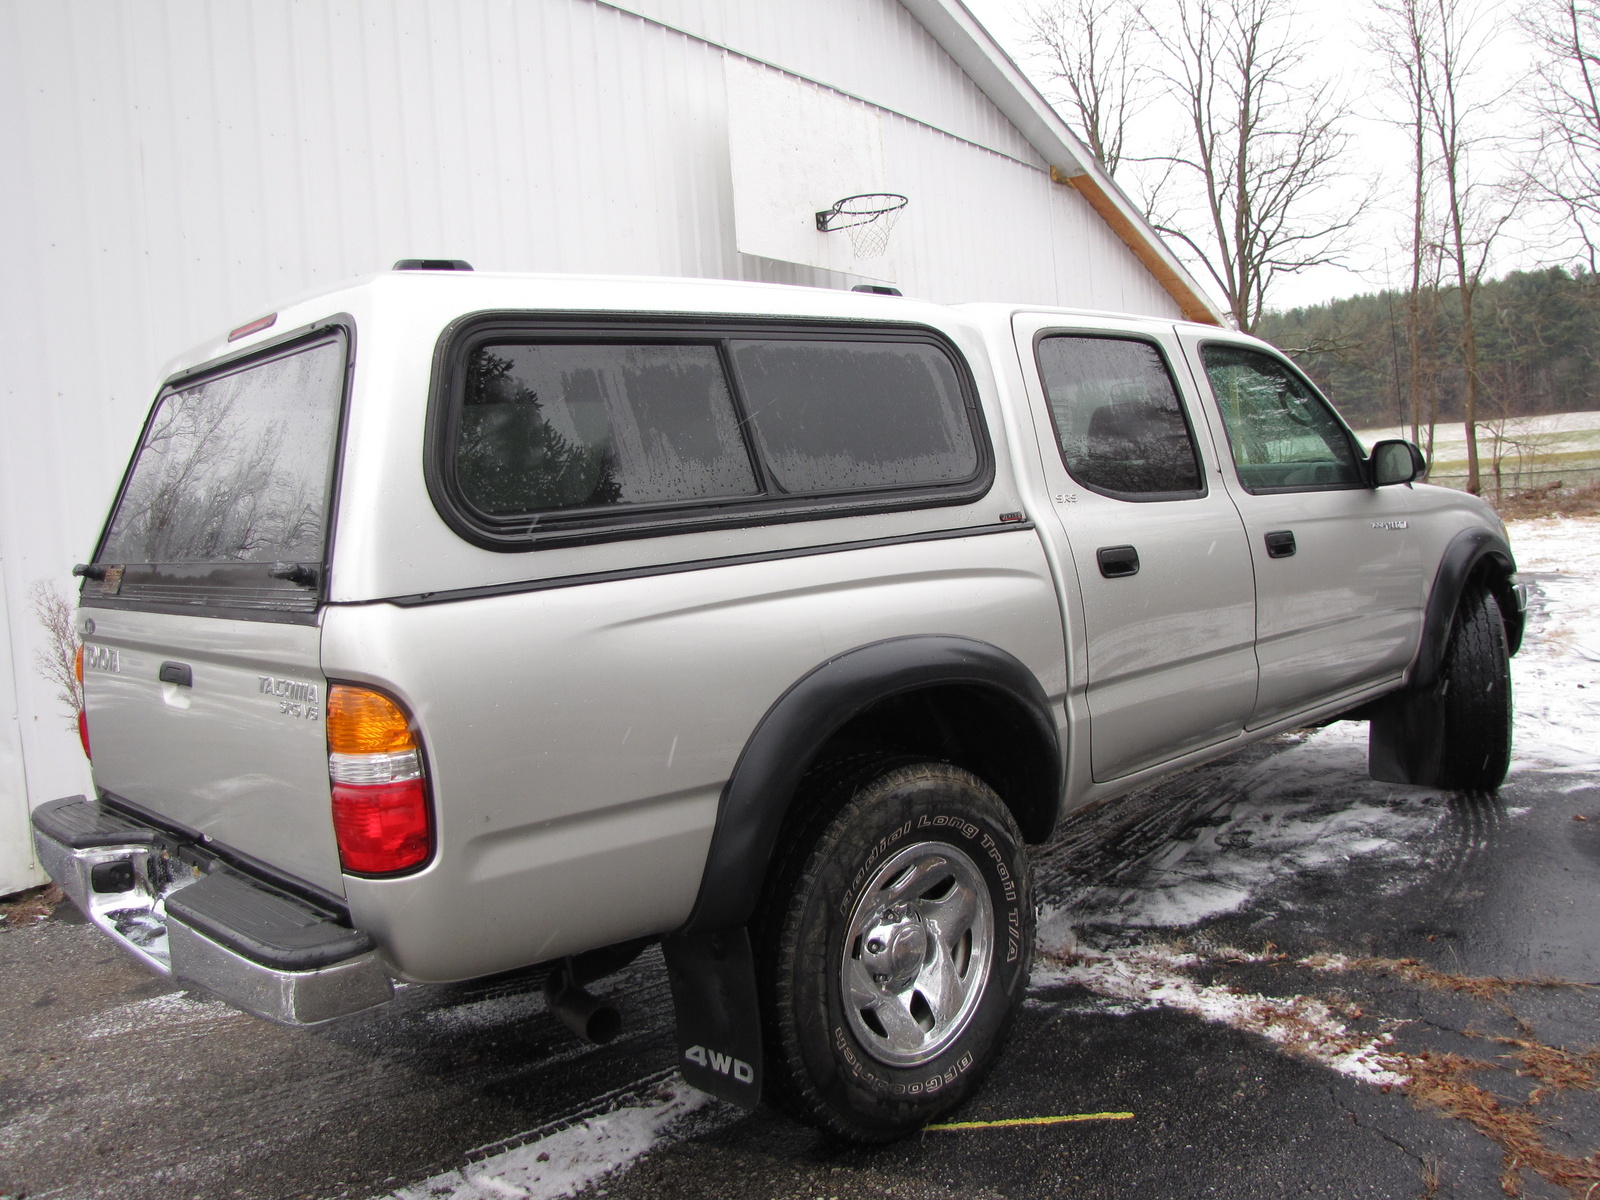 2004 toyota tacoma towing specs #2